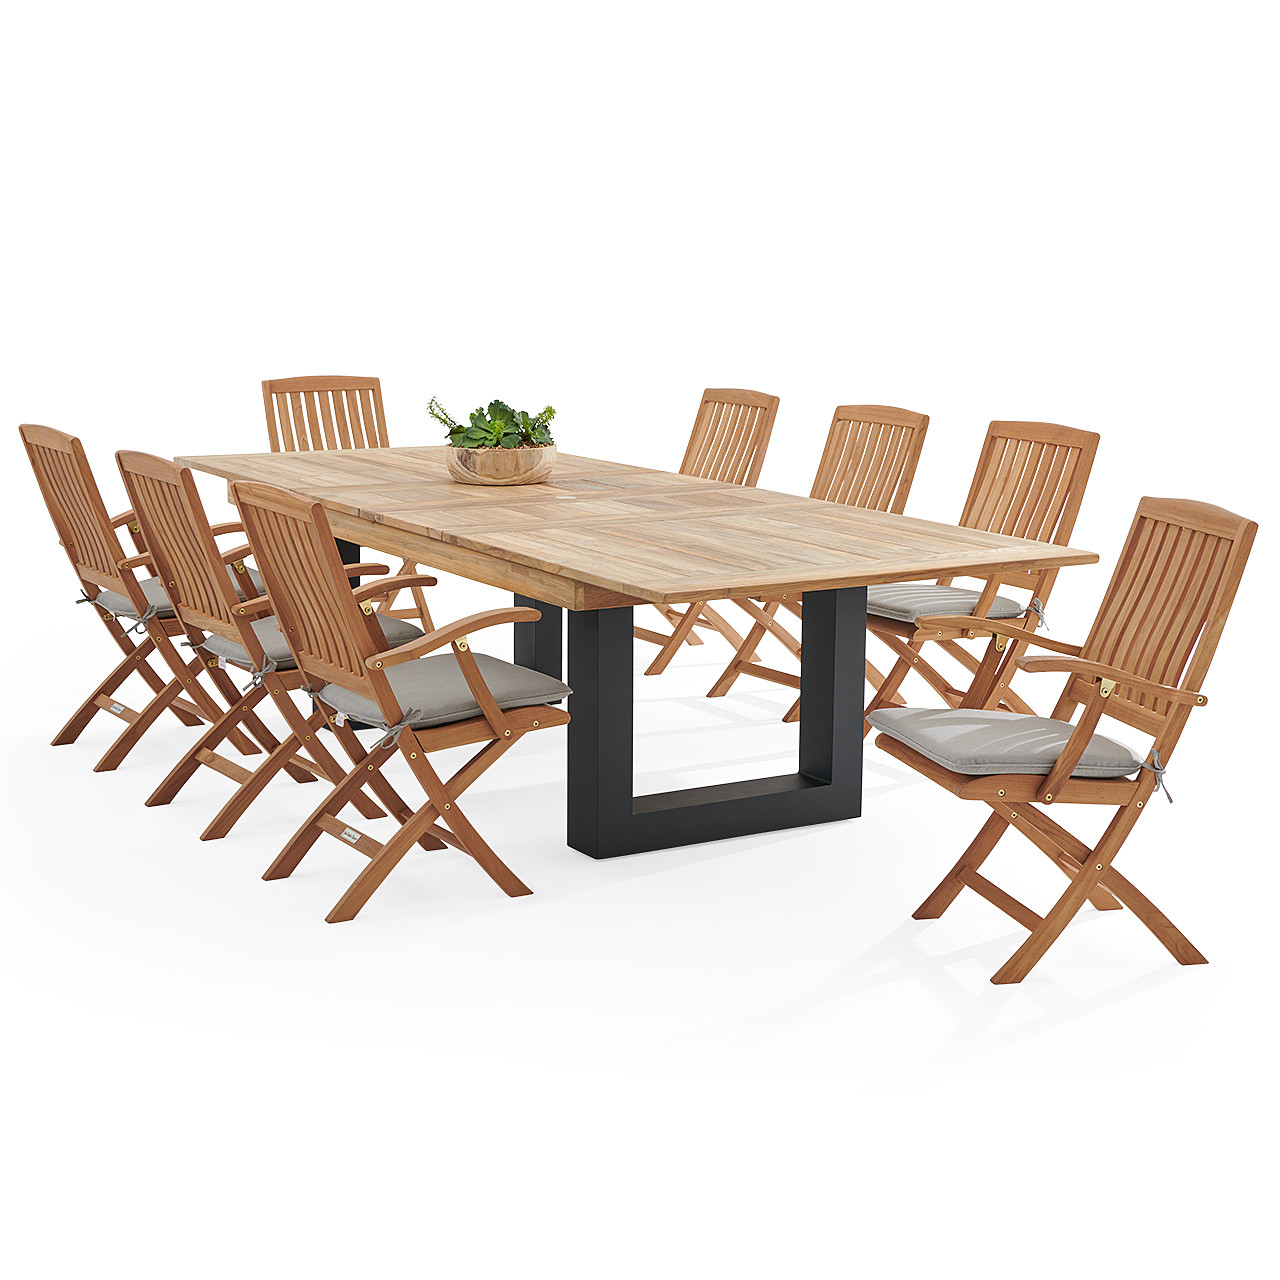 Westport Teak with Cushions 9 Piece Arm Dining Set + Balencia 87-118 x 47 in. Double Extension Table